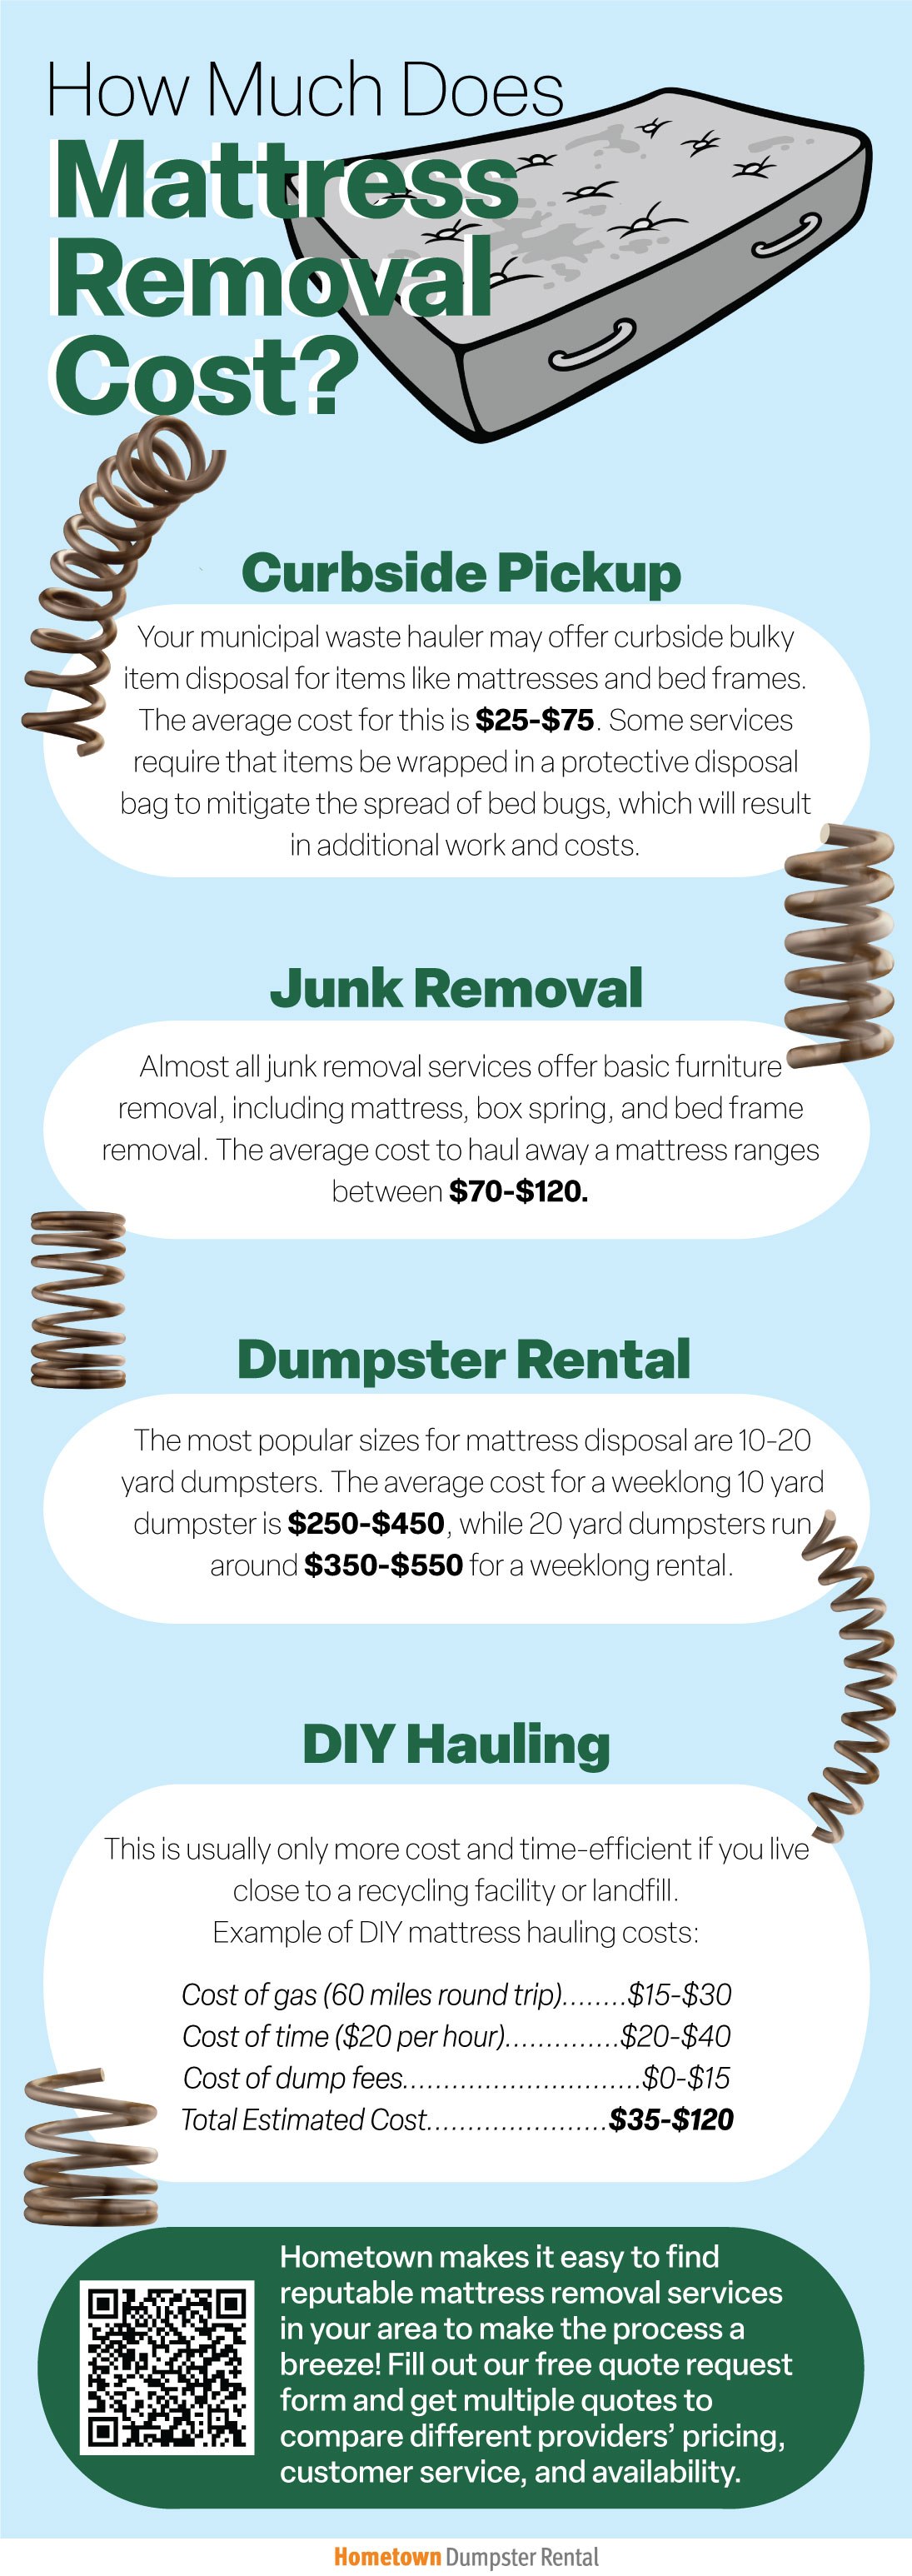 How Much Does Mattress Removal Cost? Infographic